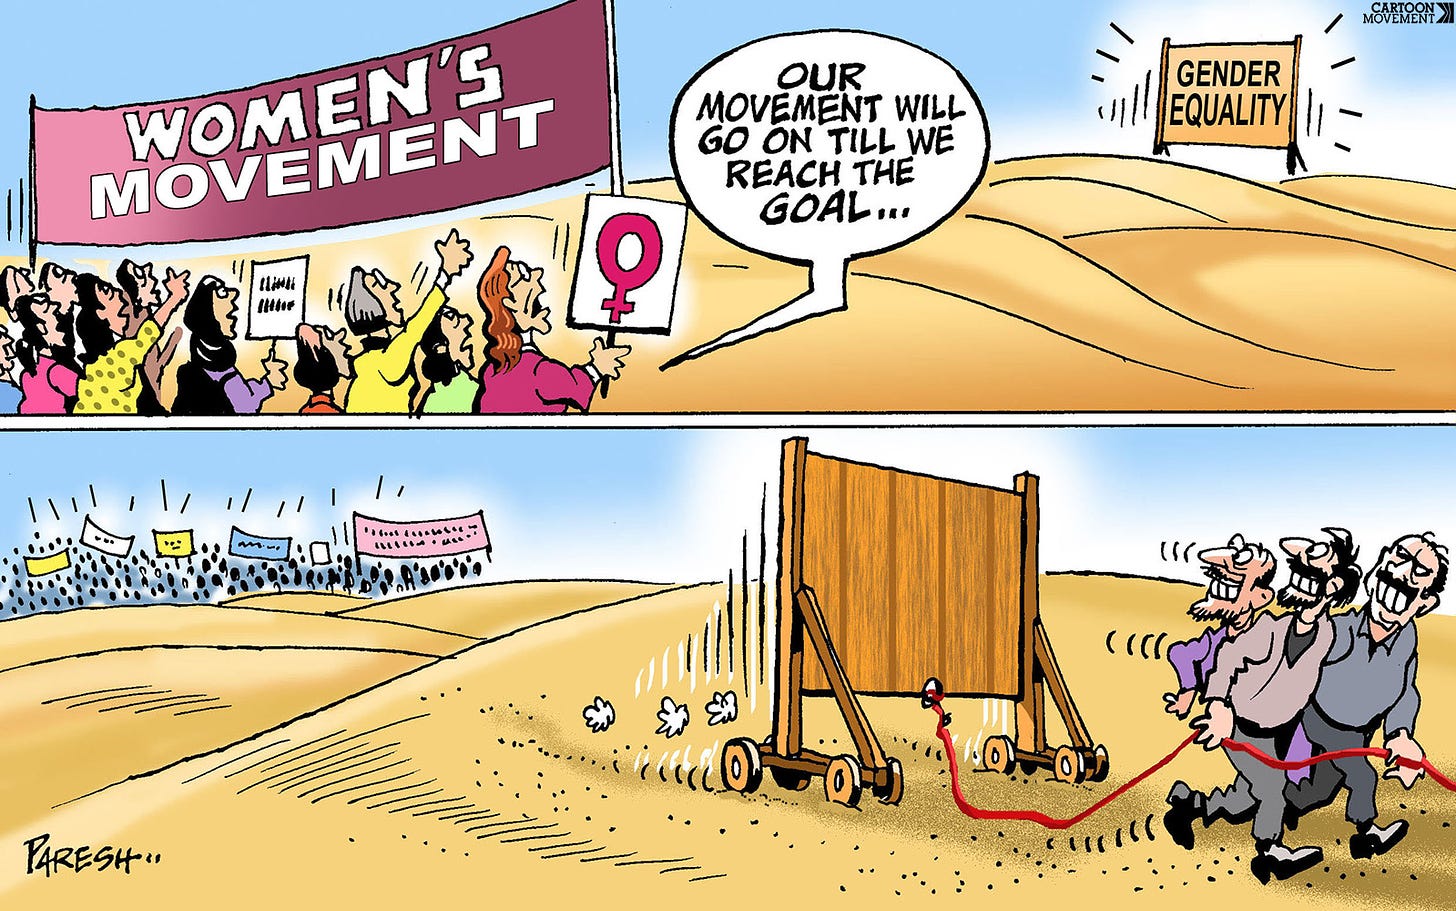 Two panel cartoon. The first panel shows a crowd of women carrying a banner that says 'Women's movement' walking towards a sign that reads 'gender equality'. One of the women days: 'Our movement will go on till we reach the goal...' The second panel shows the gender equality sign from the back. We no see it's on wheels, and it being dragged back by men pulling on a rope.